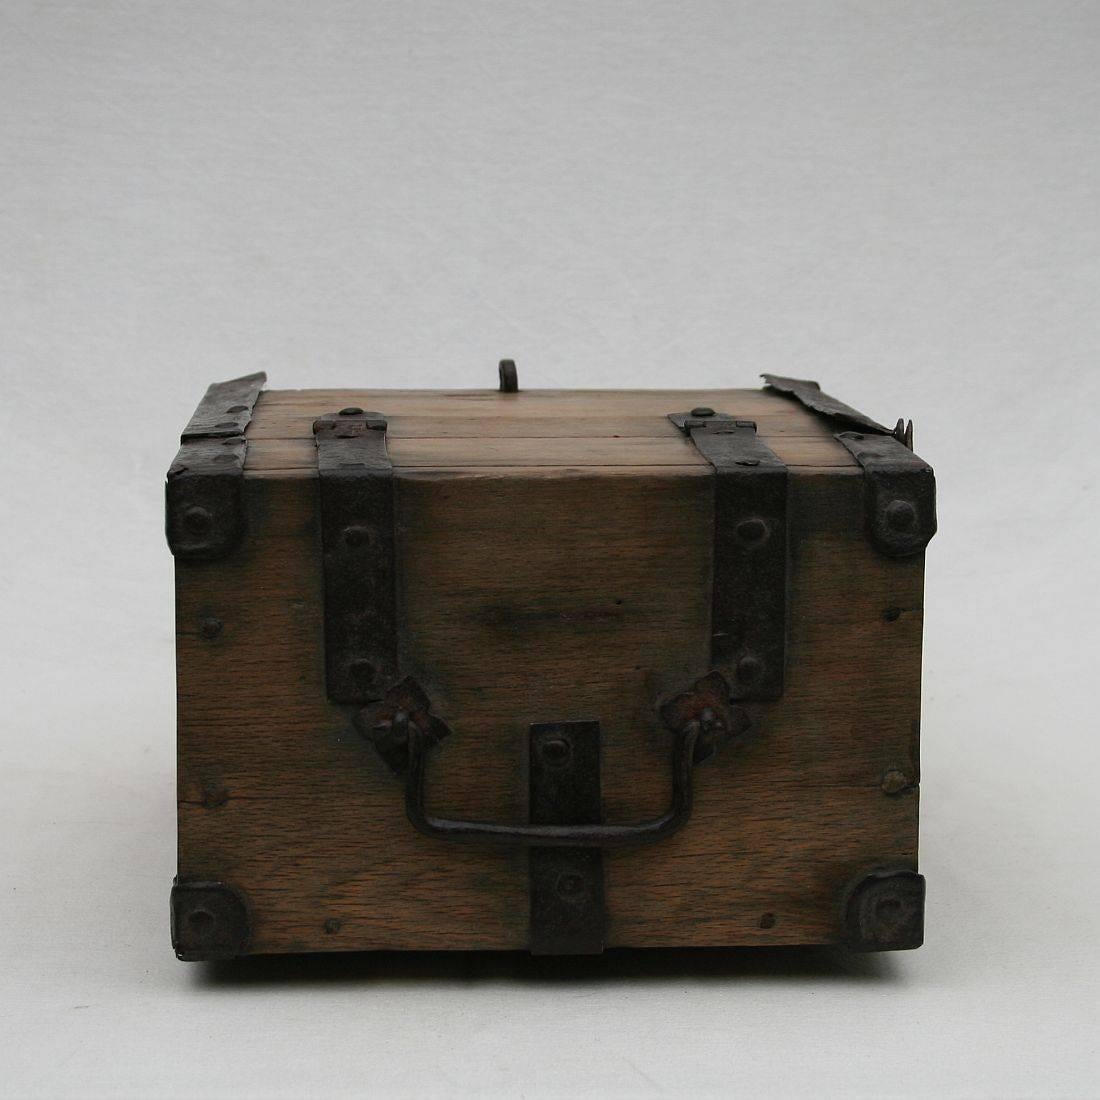 17th-18th Century German Wooden Strong Box 1